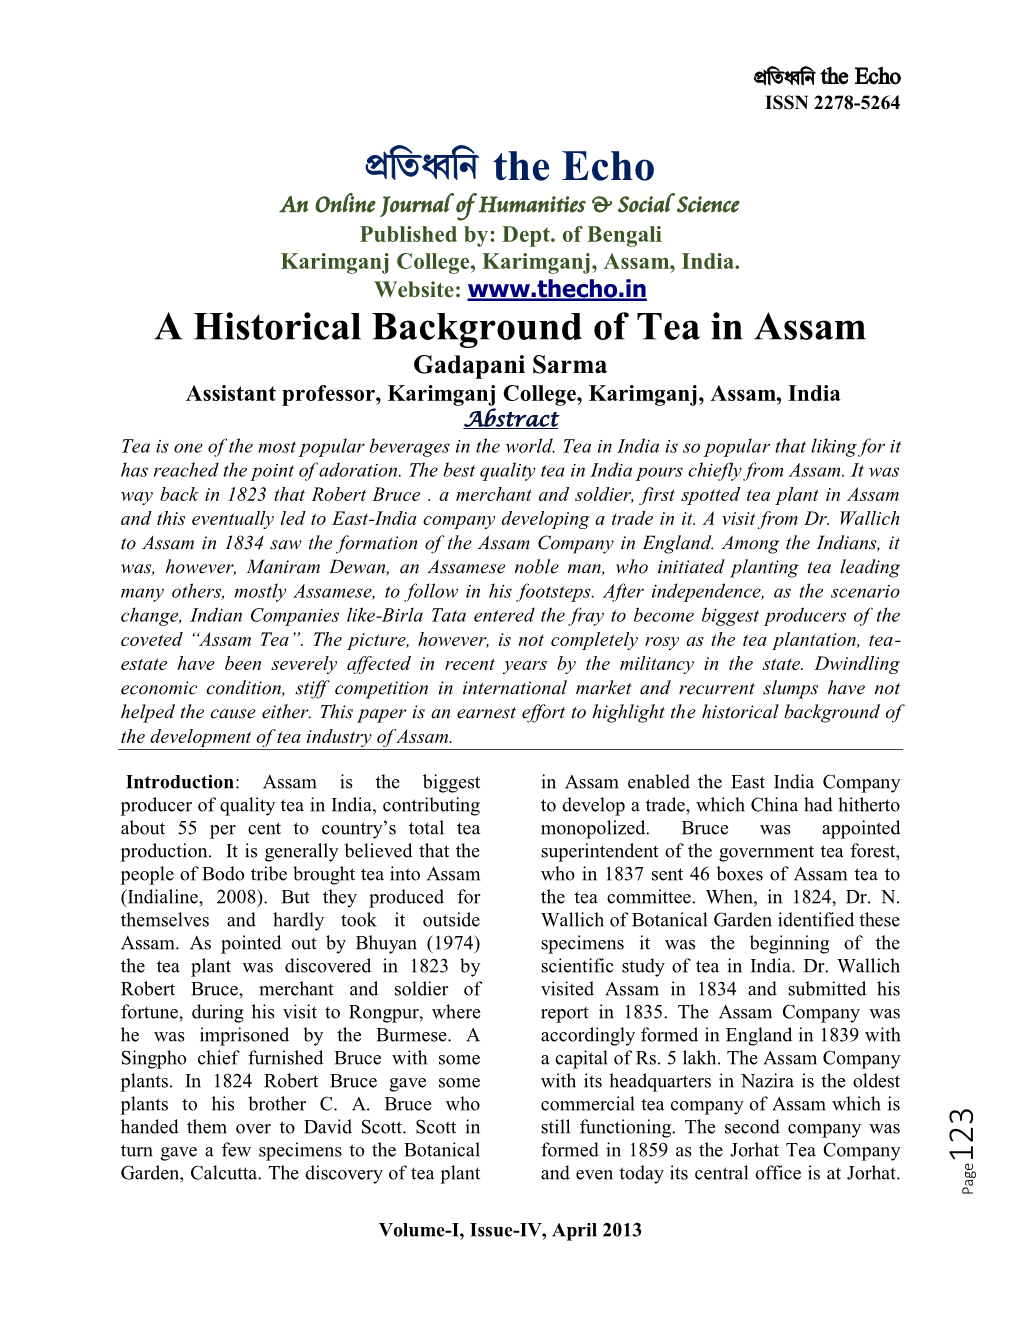 A Historical Background of Tea in Assam